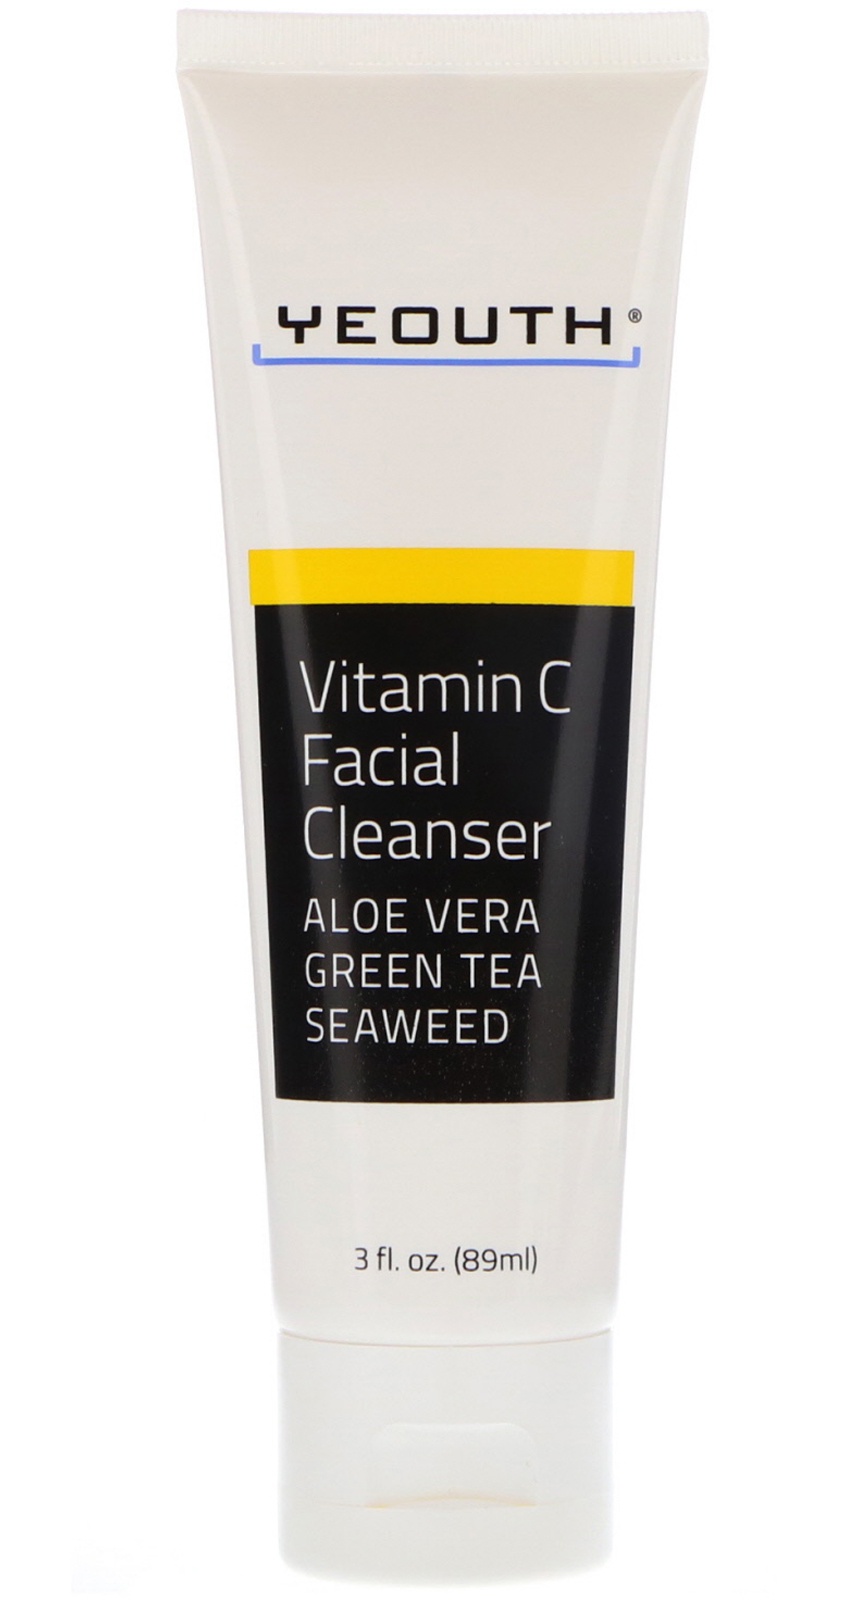 Yeouth Vitamin C Facial Cleanser